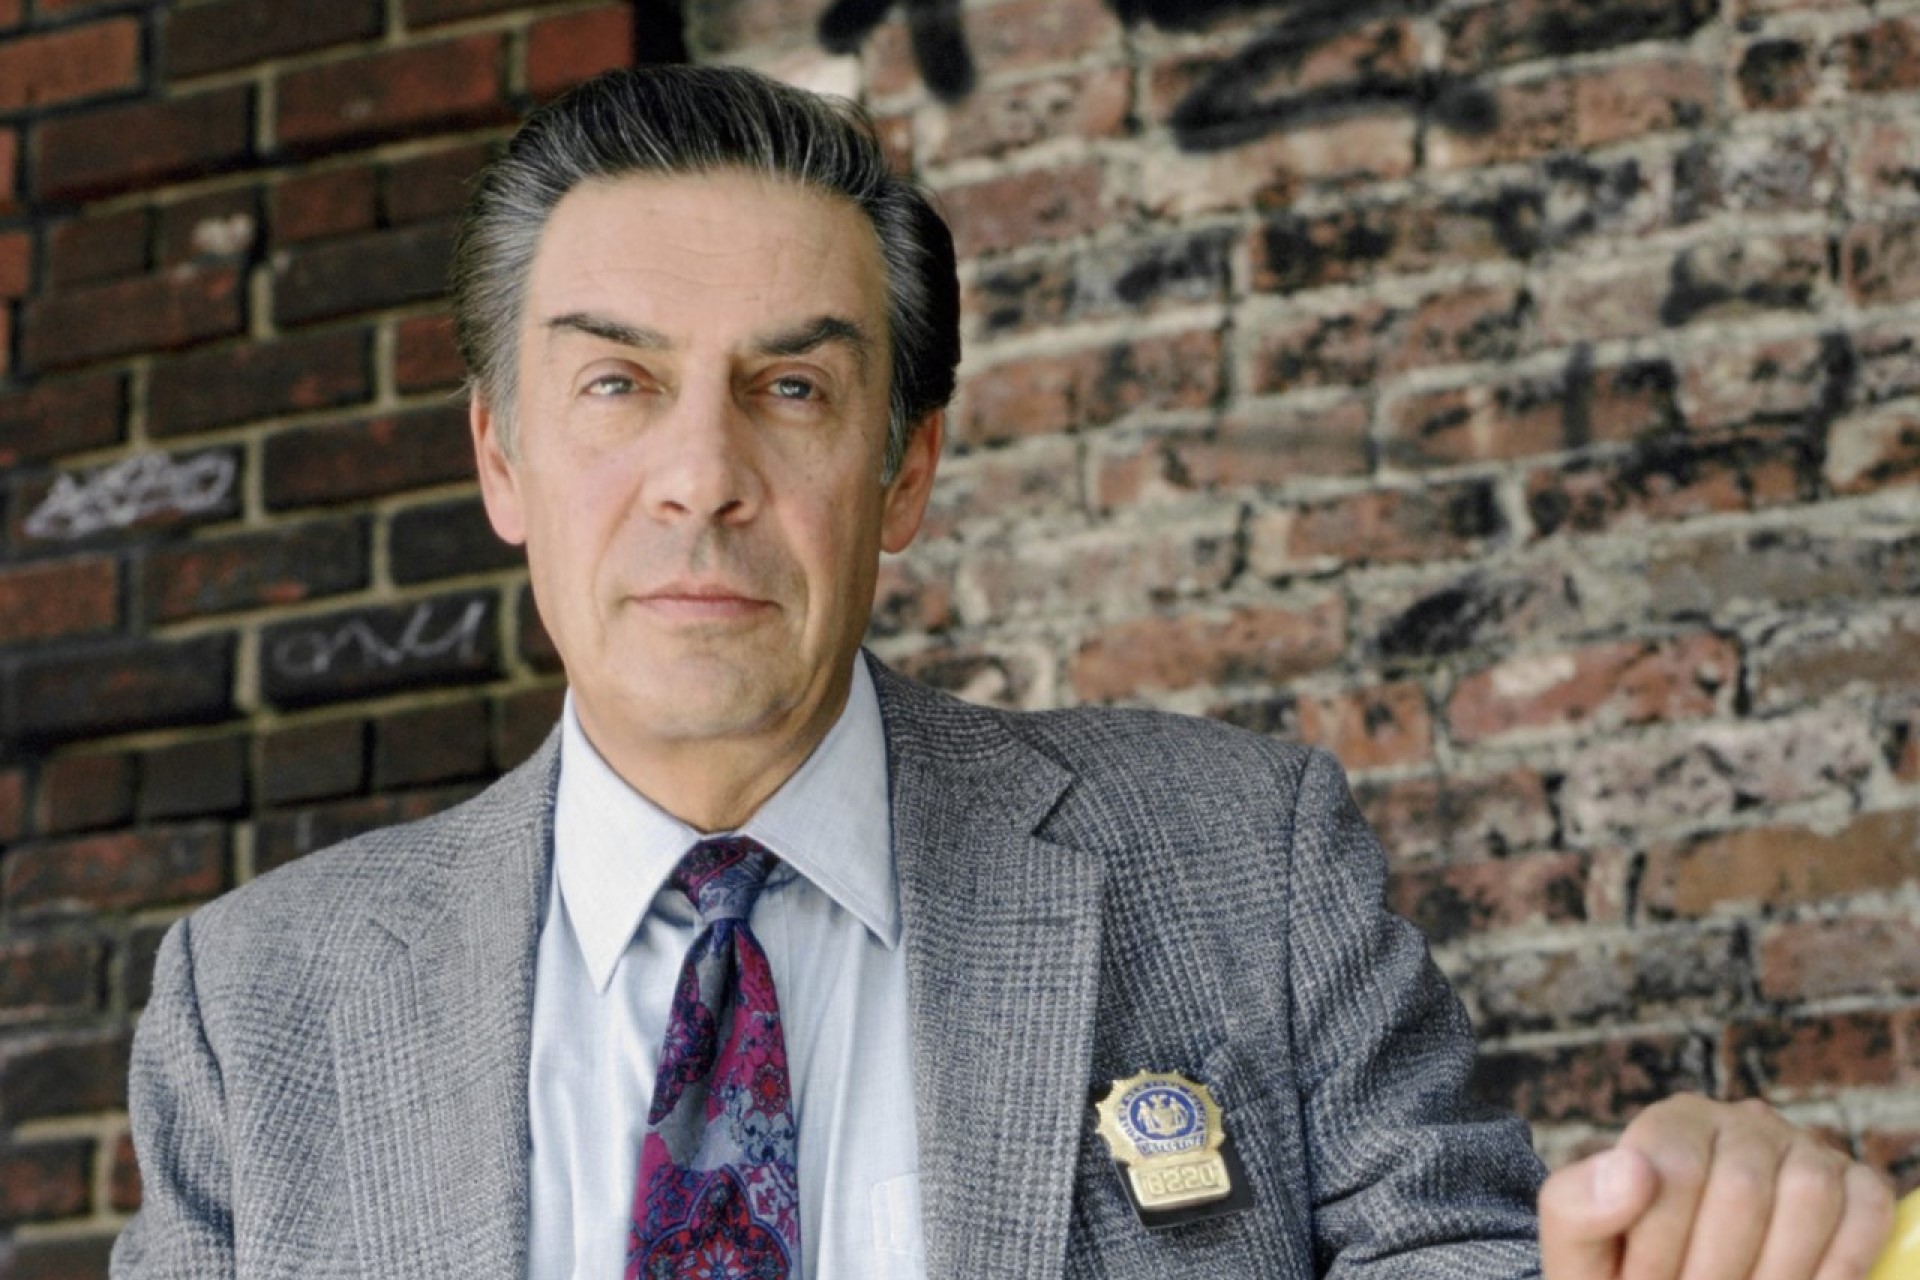 The incomparable Jerry Orbach as Detective Lennie Briscoe